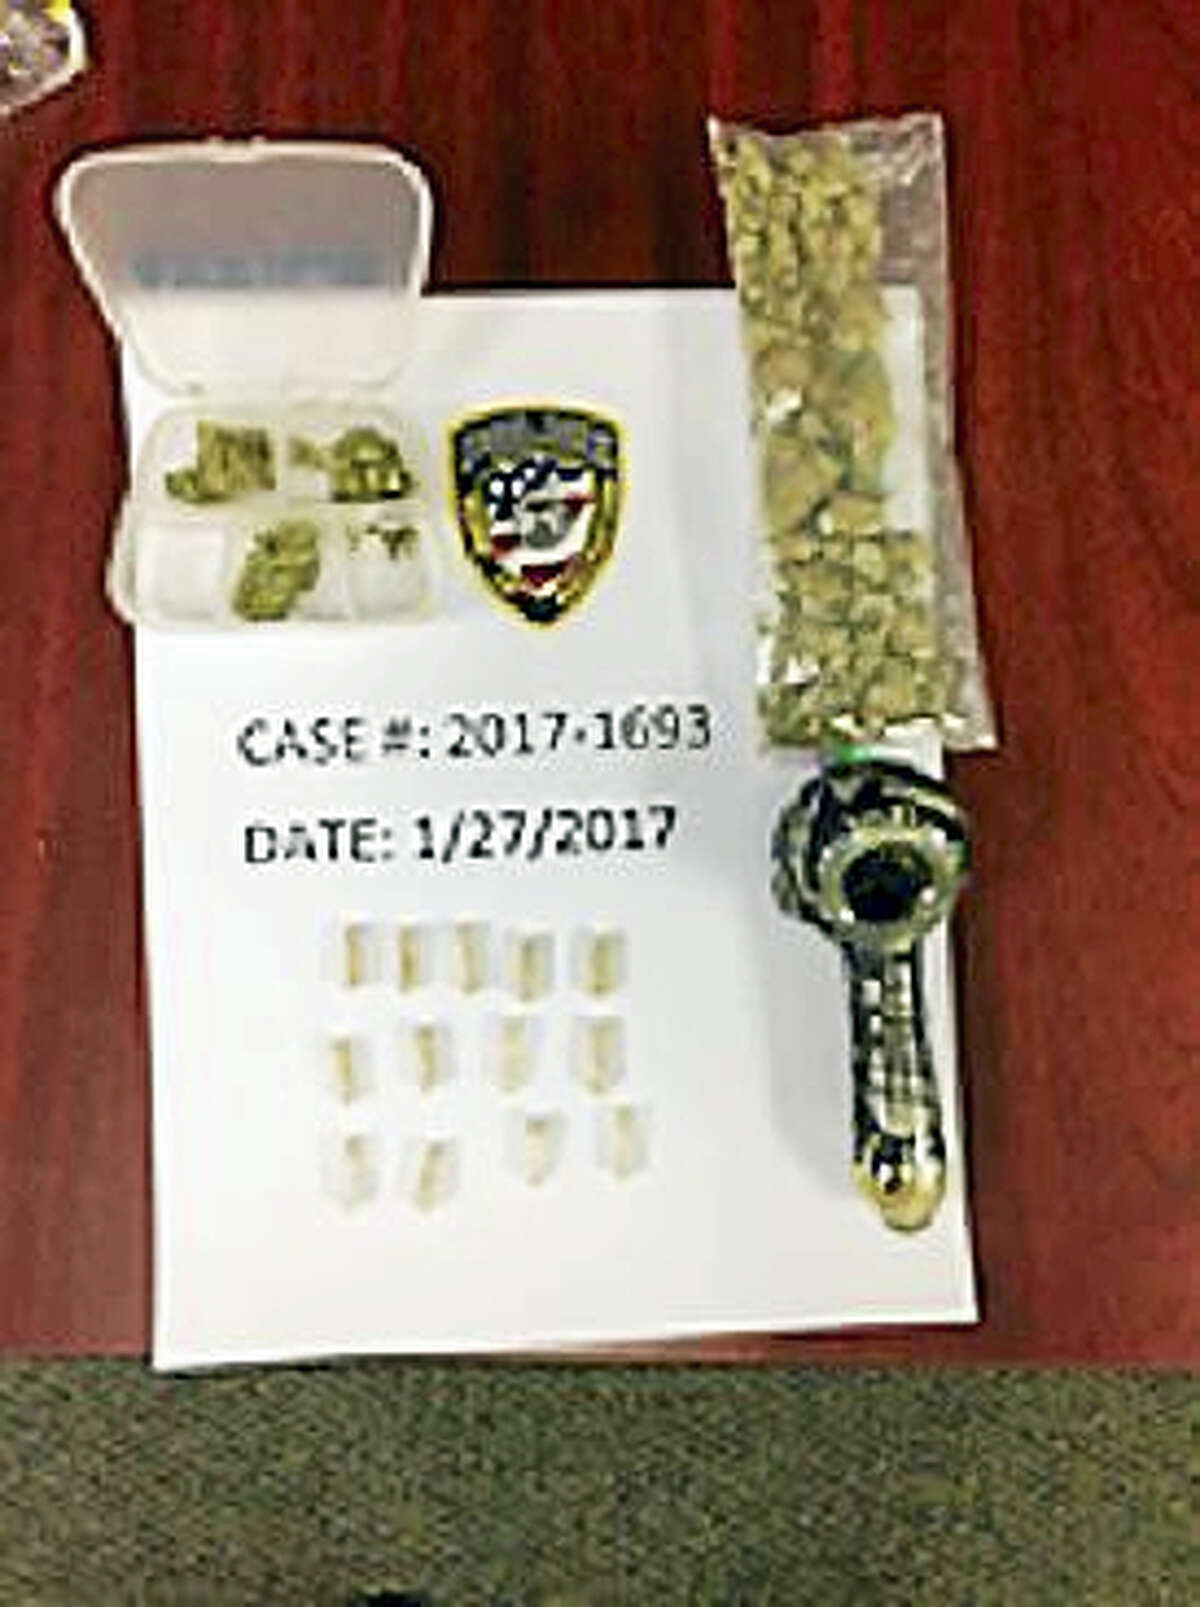 Items seized from car